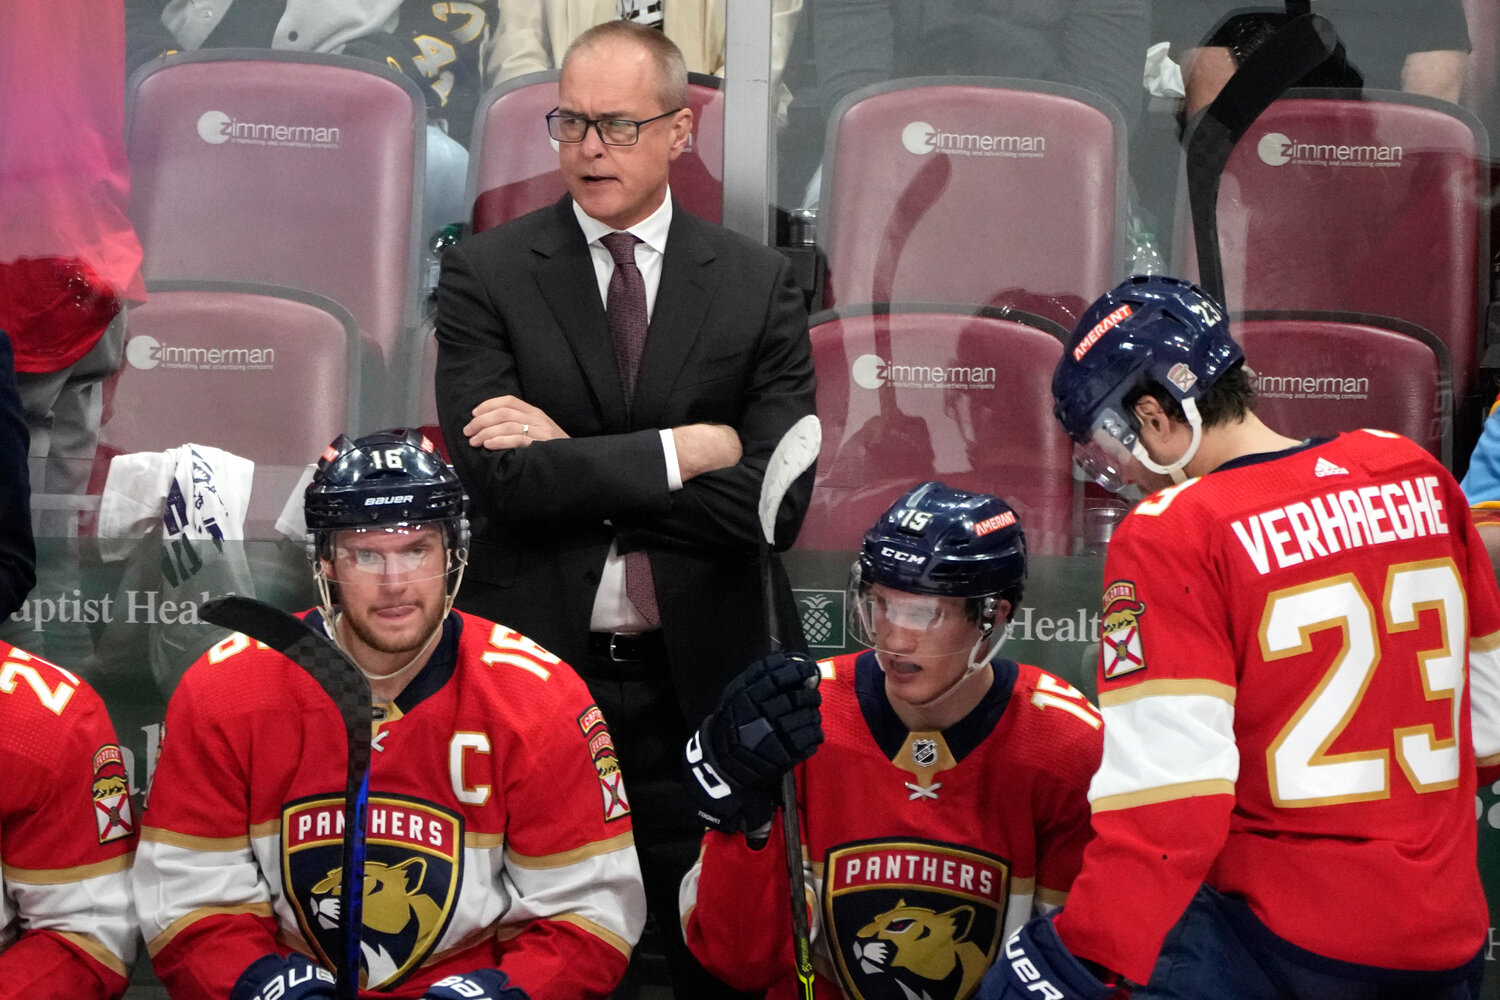 Florida Panthers head coach Paul Maurice looks on during his team’s playoff series against Boston. Maurice was the coach for the Hartford Whalers when current Utica Comets coach Kevin Dineen was on the team.